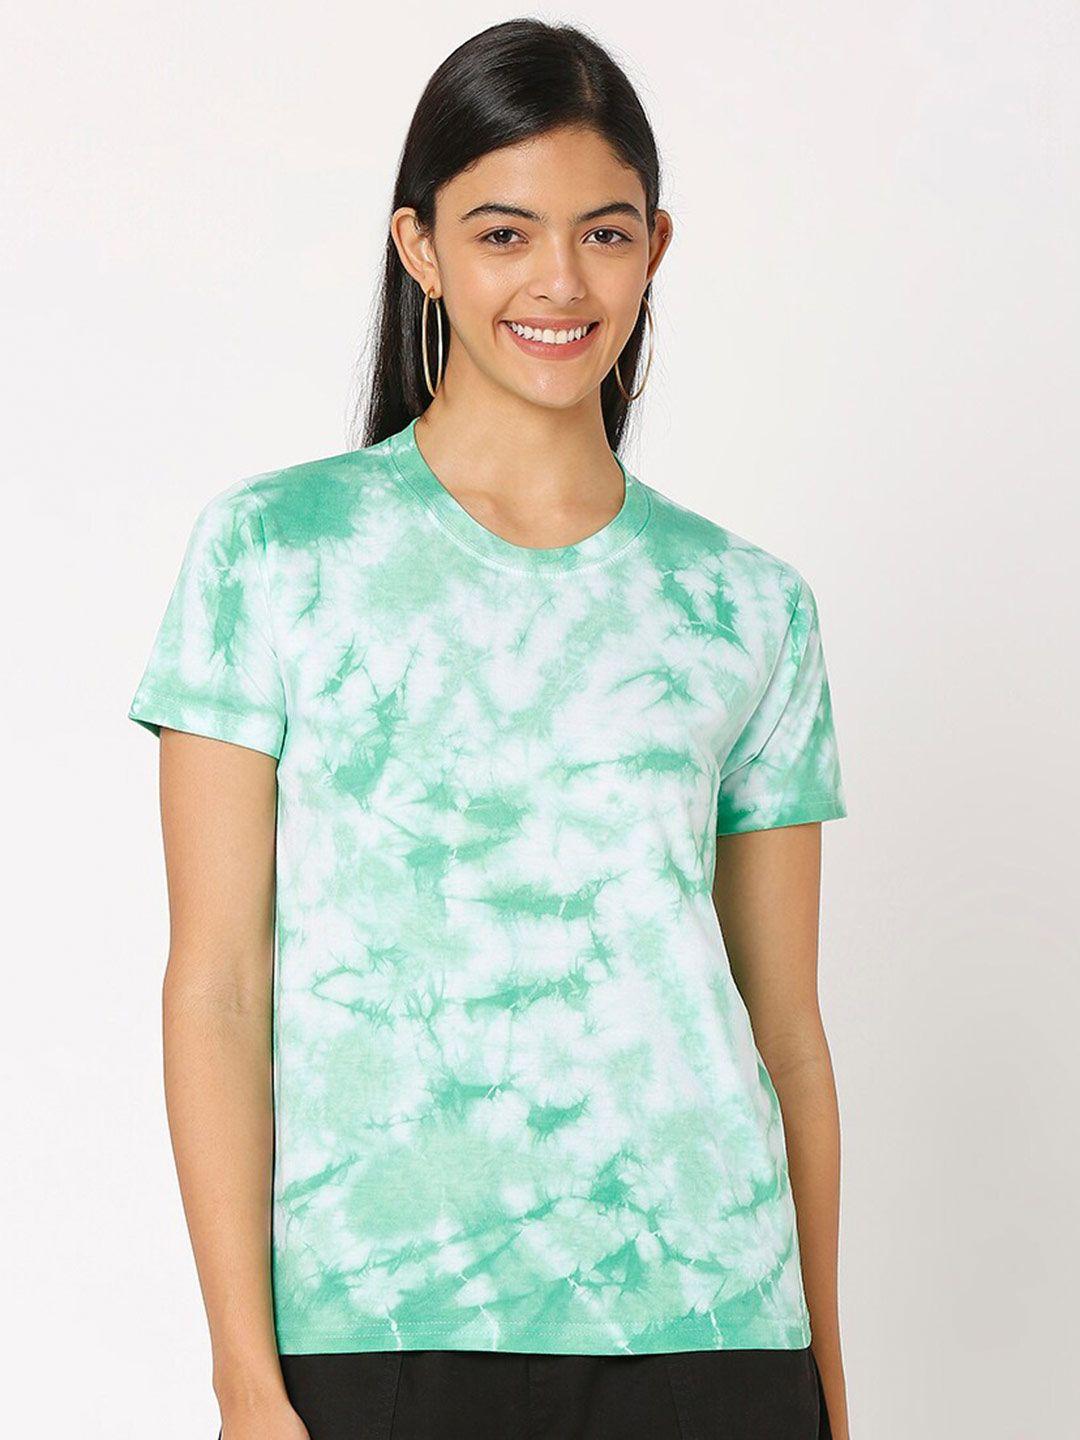 smarty pants women coral green & white tie and dye dyed t-shirt